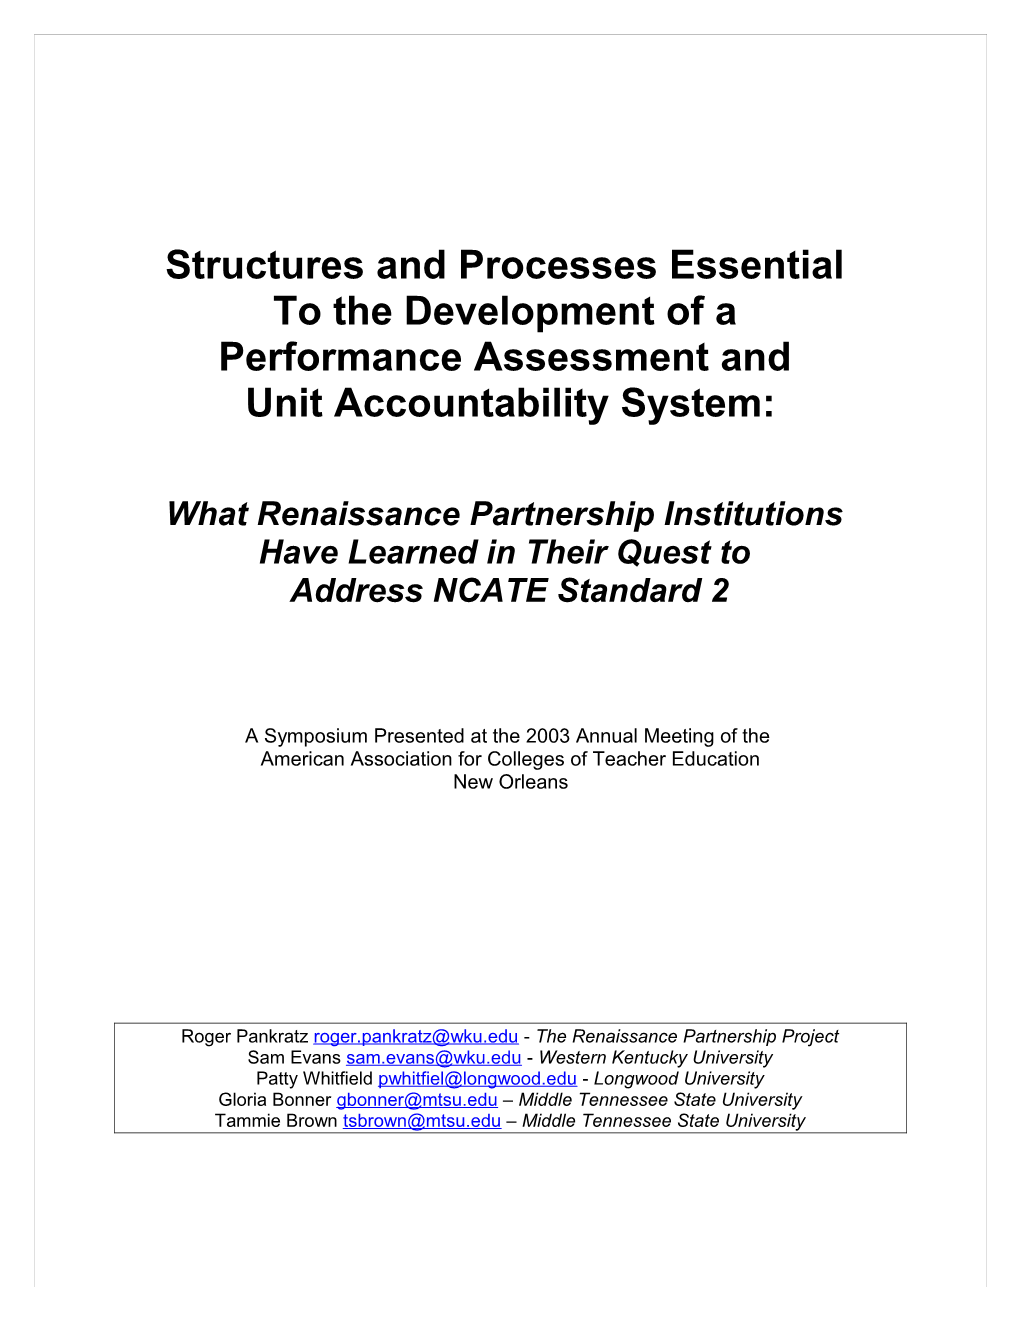 Structures and Processes Essential to the Development of a Performance Assessment and Unit